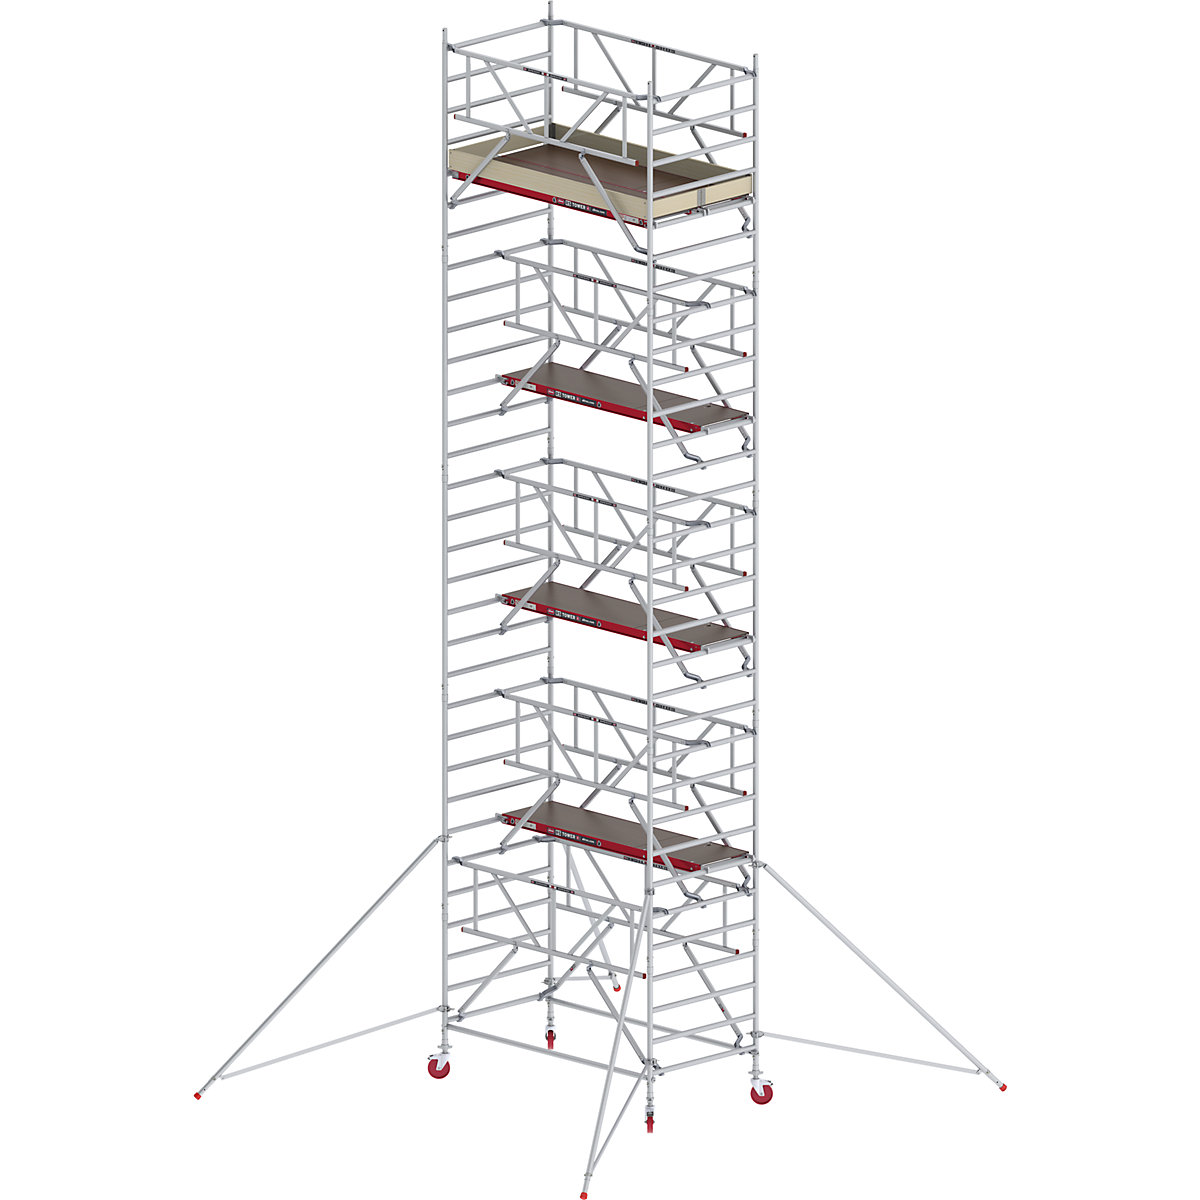 RS TOWER 42 wide mobile access tower with Safe-Quick® – Altrex, wooden platform, length 1.85 m, working height 10.20 m-5